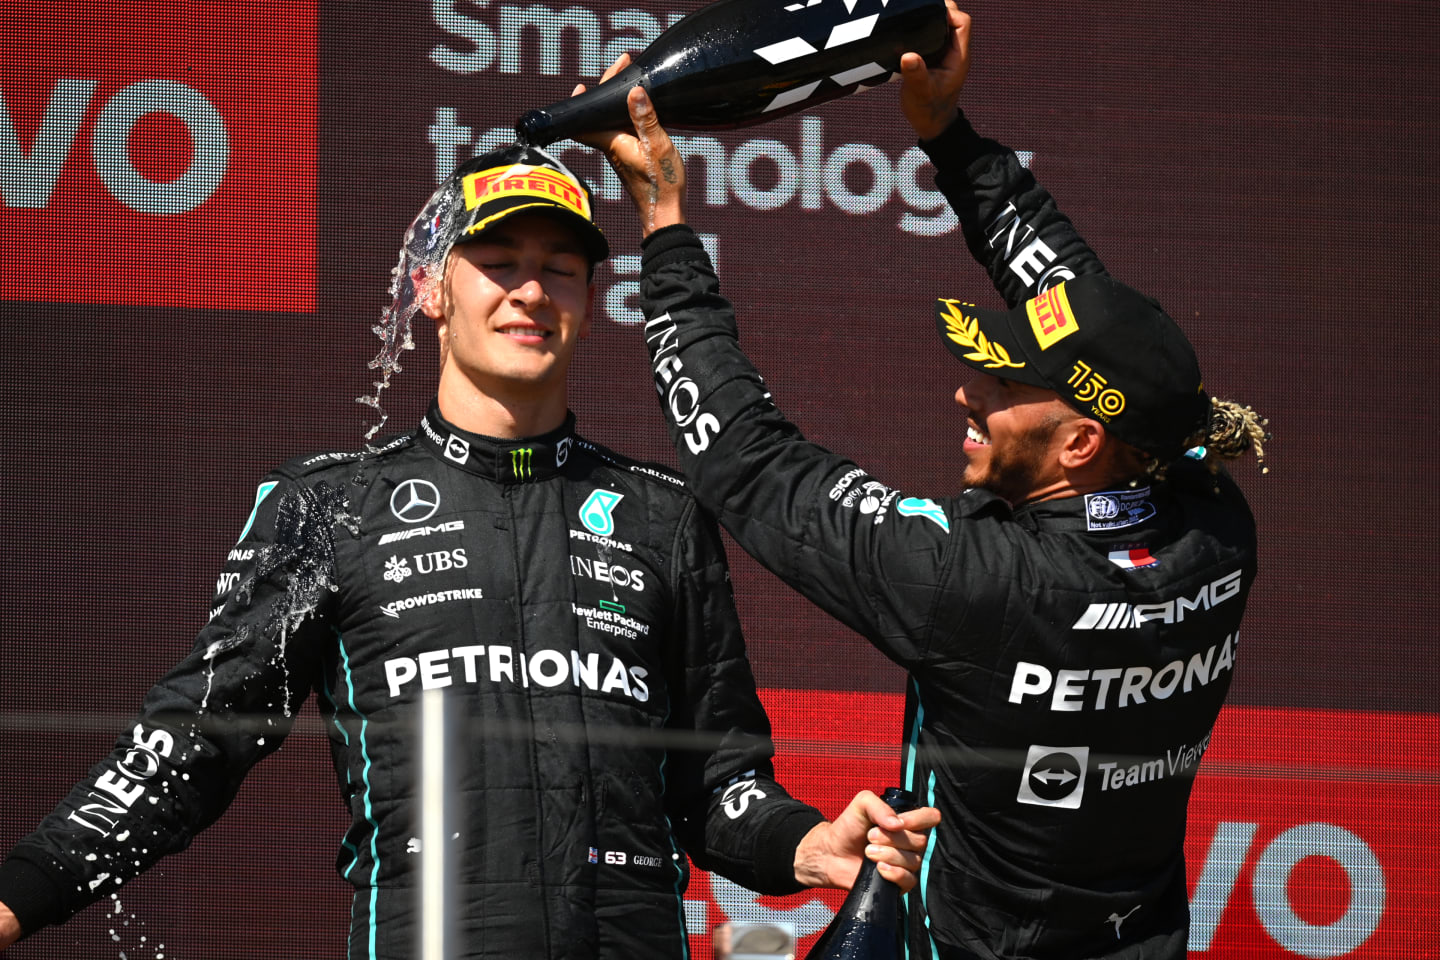 LE CASTELLET, FRANCE - JULY 24: Second placed Lewis Hamilton of Great Britain and Mercedes and Third placed George Russell of Great Britain and Mercedes celebrate on the podium during the F1 Grand Prix of France at Circuit Paul Ricard on July 24, 2022 in Le Castellet, France. (Photo by Dan Mullan/Getty Images)